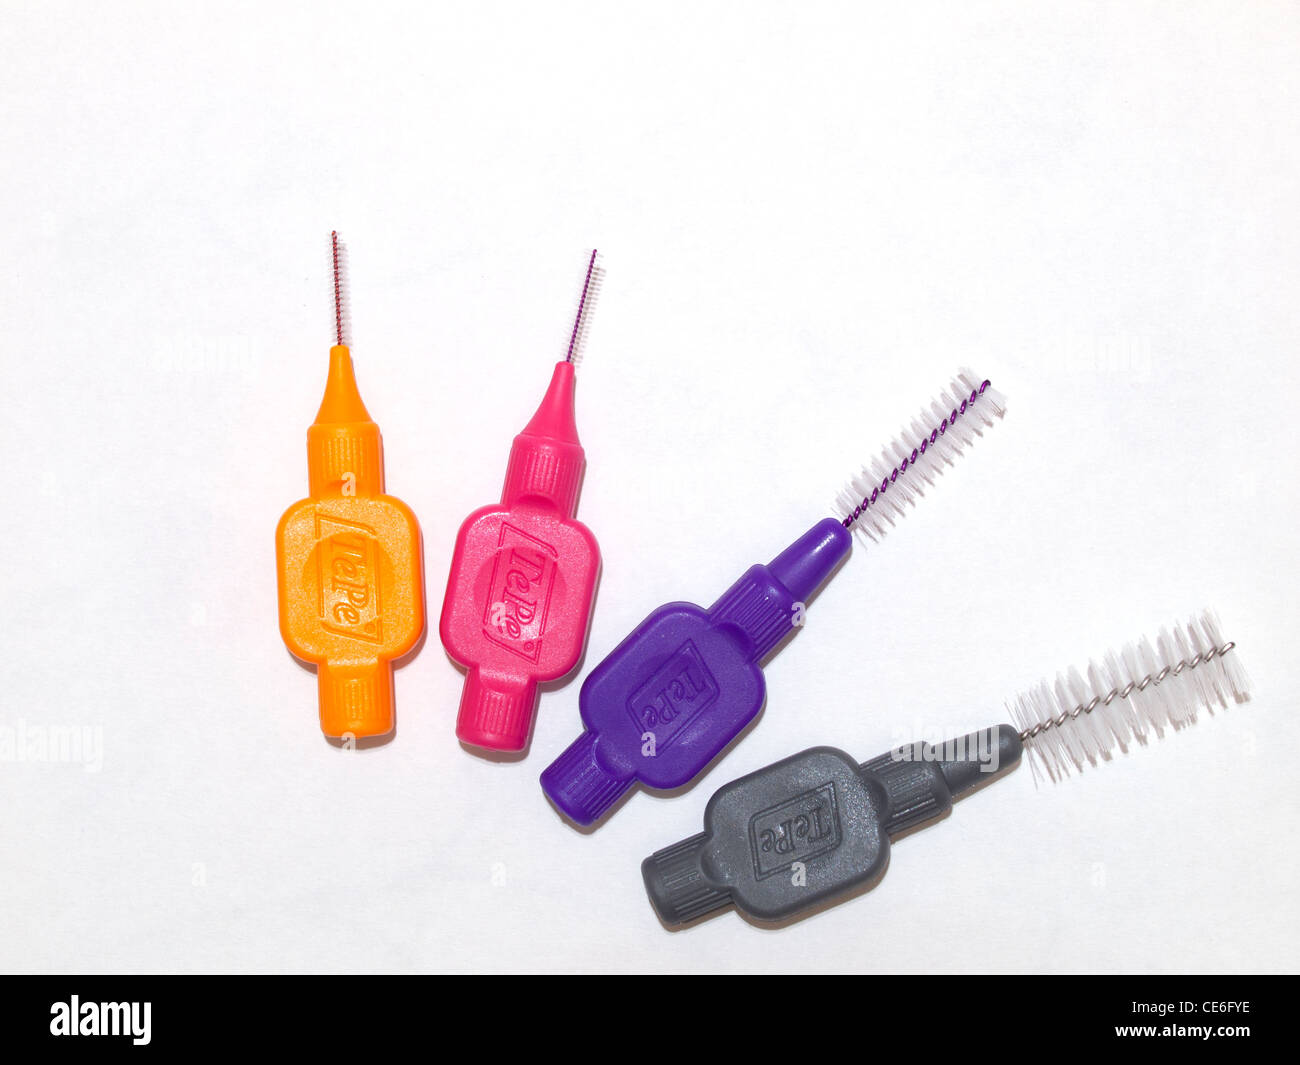 Four inter dental tooth brushes of various sizes for cleaning between teeth arranged in a fan shape Stock Photo